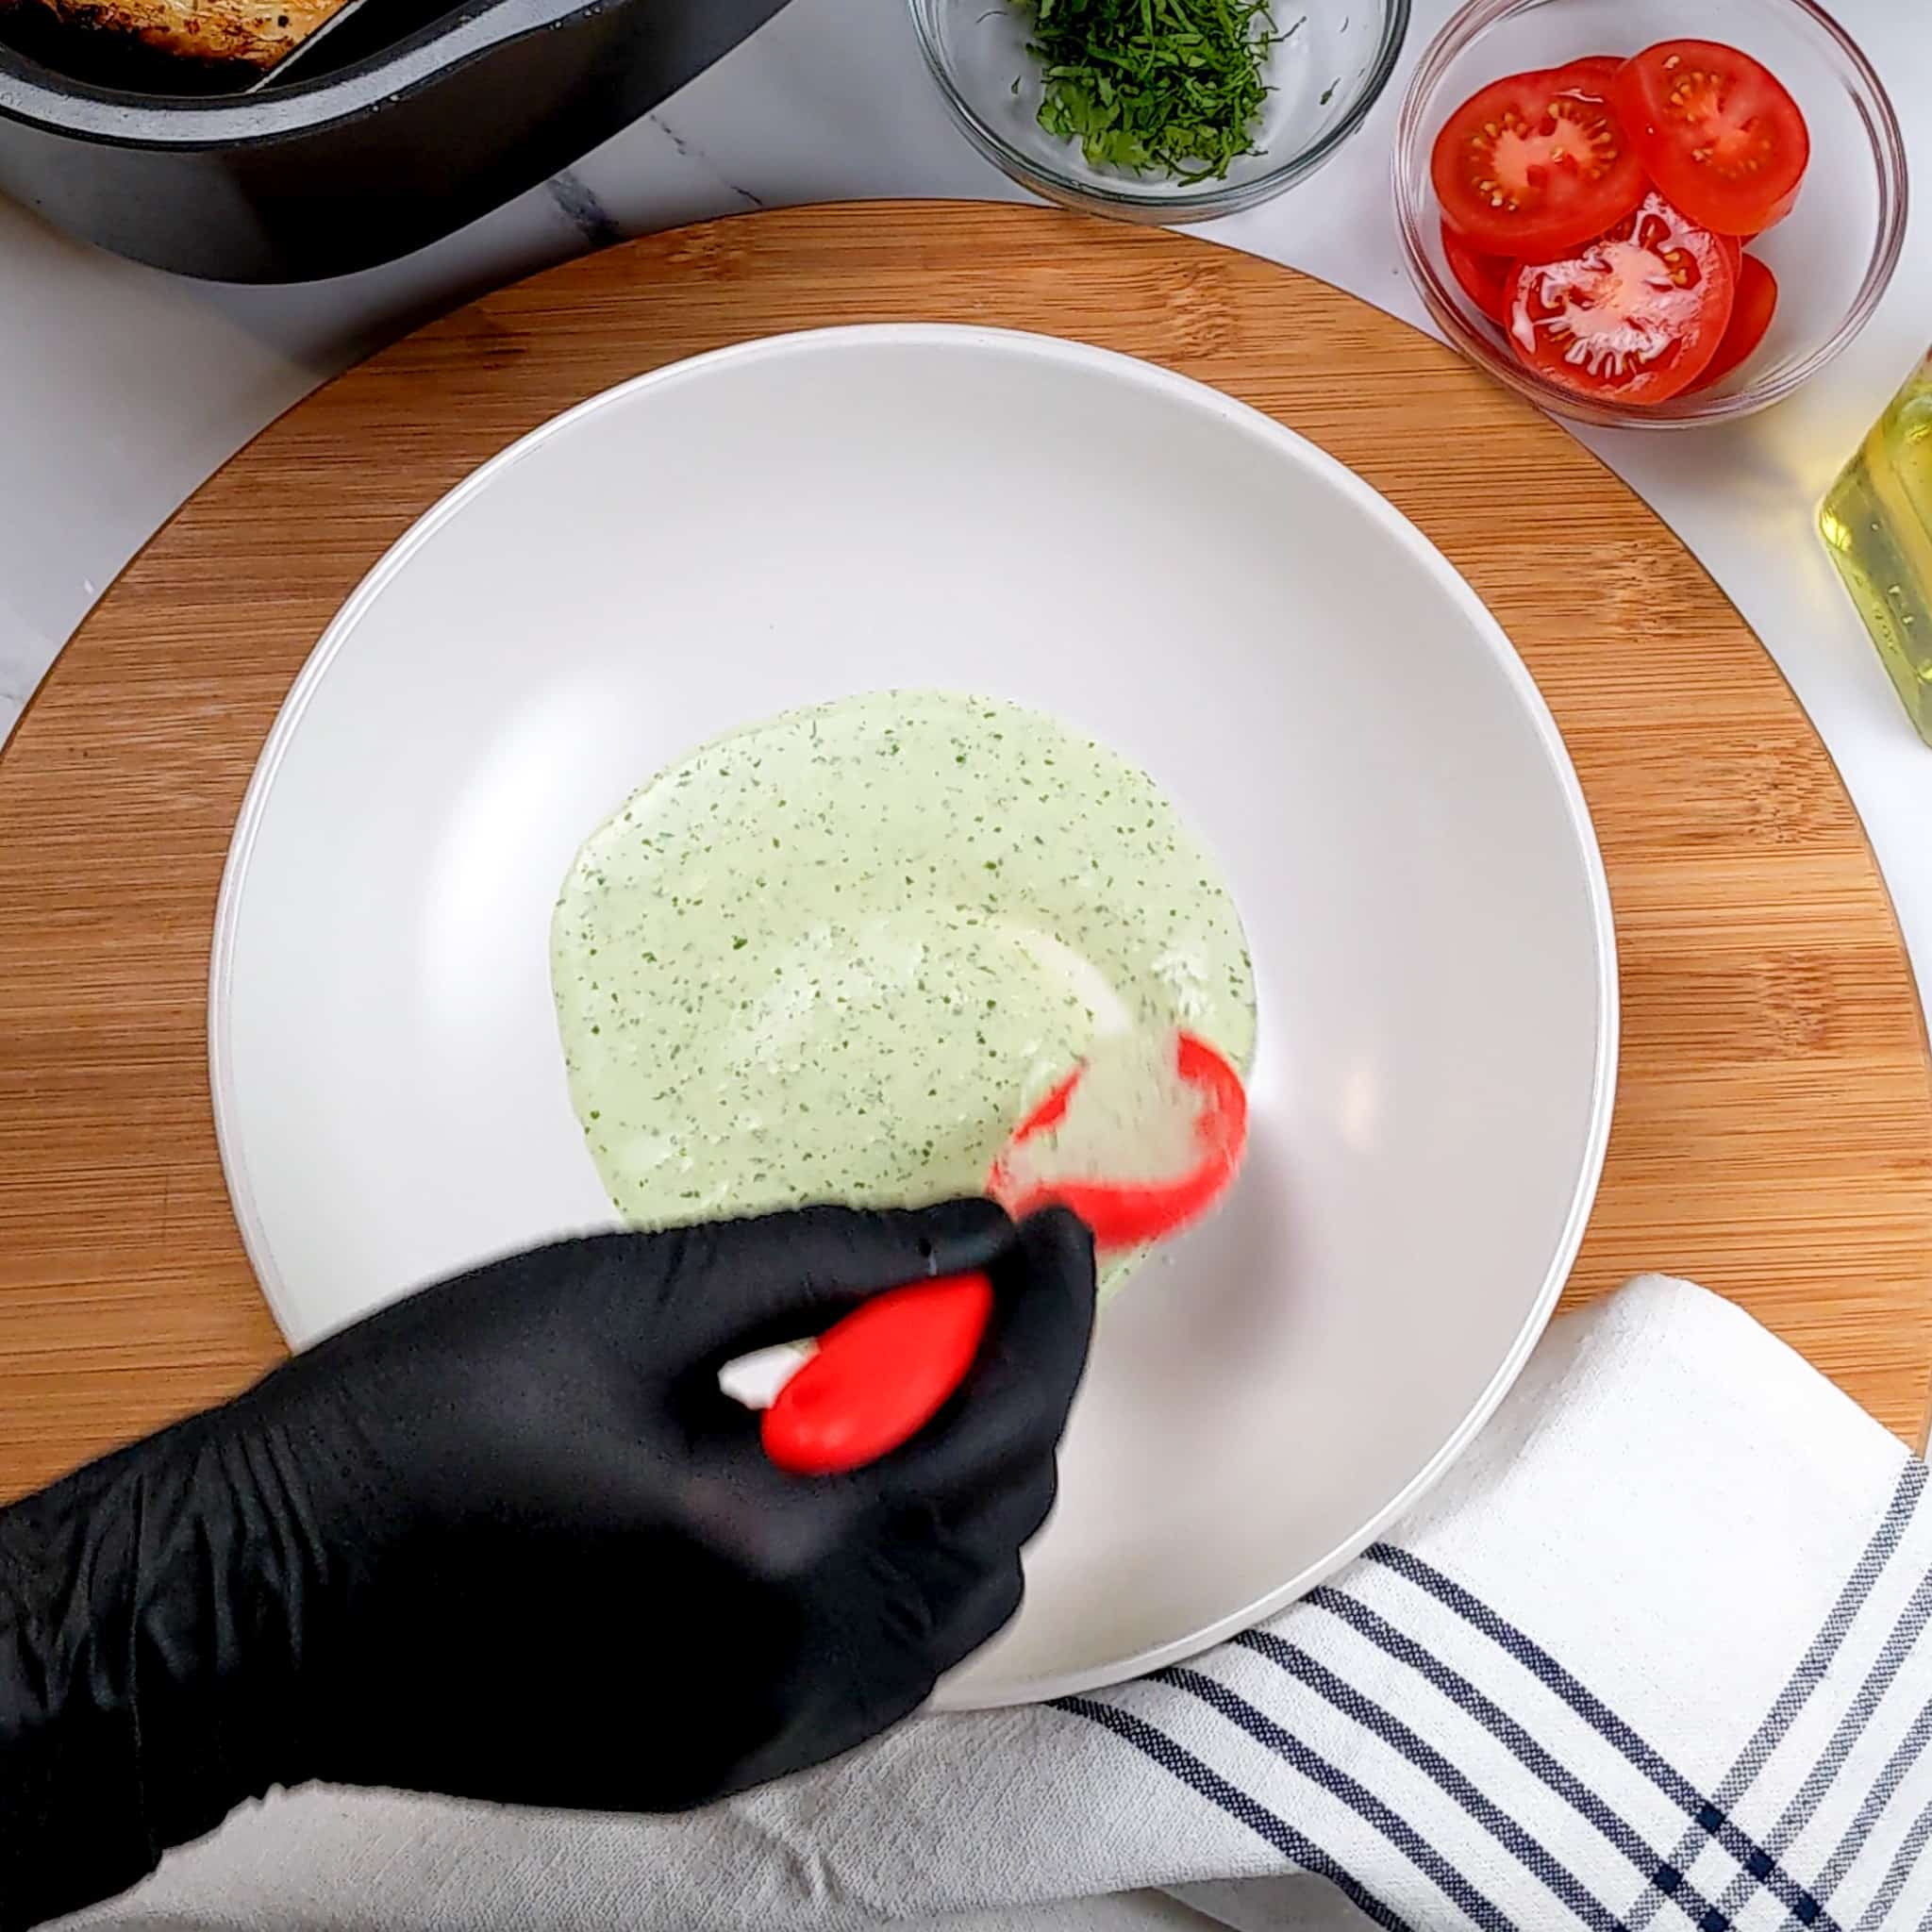 the spicy green jalapeno vinaigrette being plated in a wide rim bowl with a GIR silicone spoon by a gloved hand